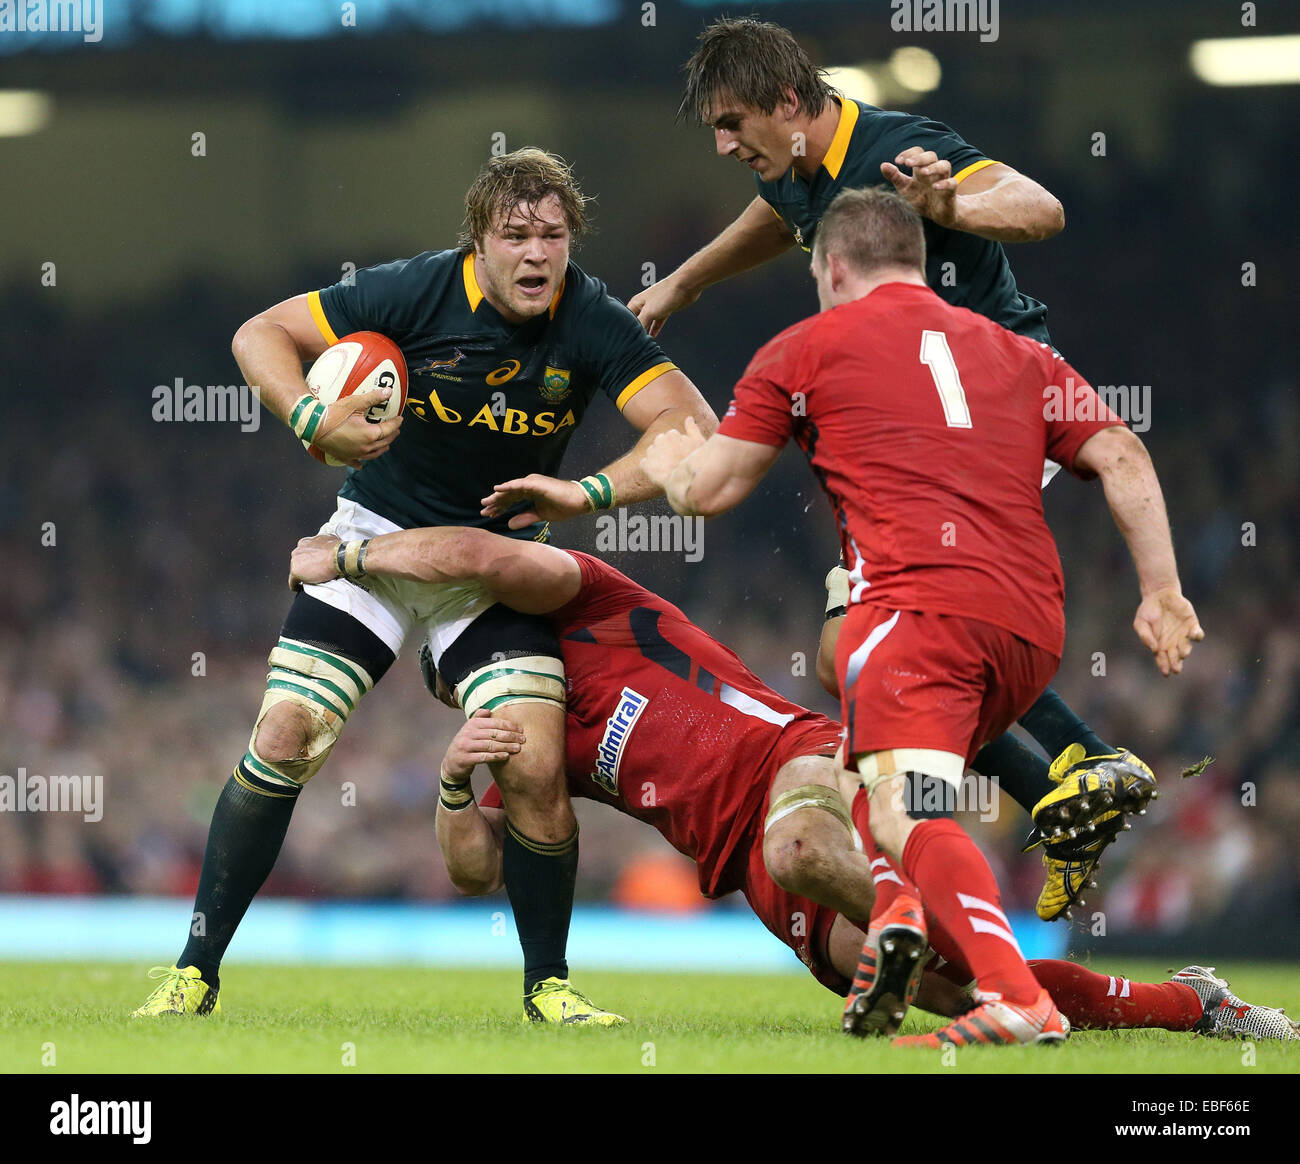 Cardiff, UK. 29th Nov, 2014. Duane Vermeulen of South Africa tackled by Dan Lydiate of Wales - Autumn Internationals - Wales vs South Africa - Millennium Stadium - Cardiff - Wales - 29th November 2014 - Picture Simon Bellis/Sportimage. Credit:  csm/Alamy Live News Stock Photo